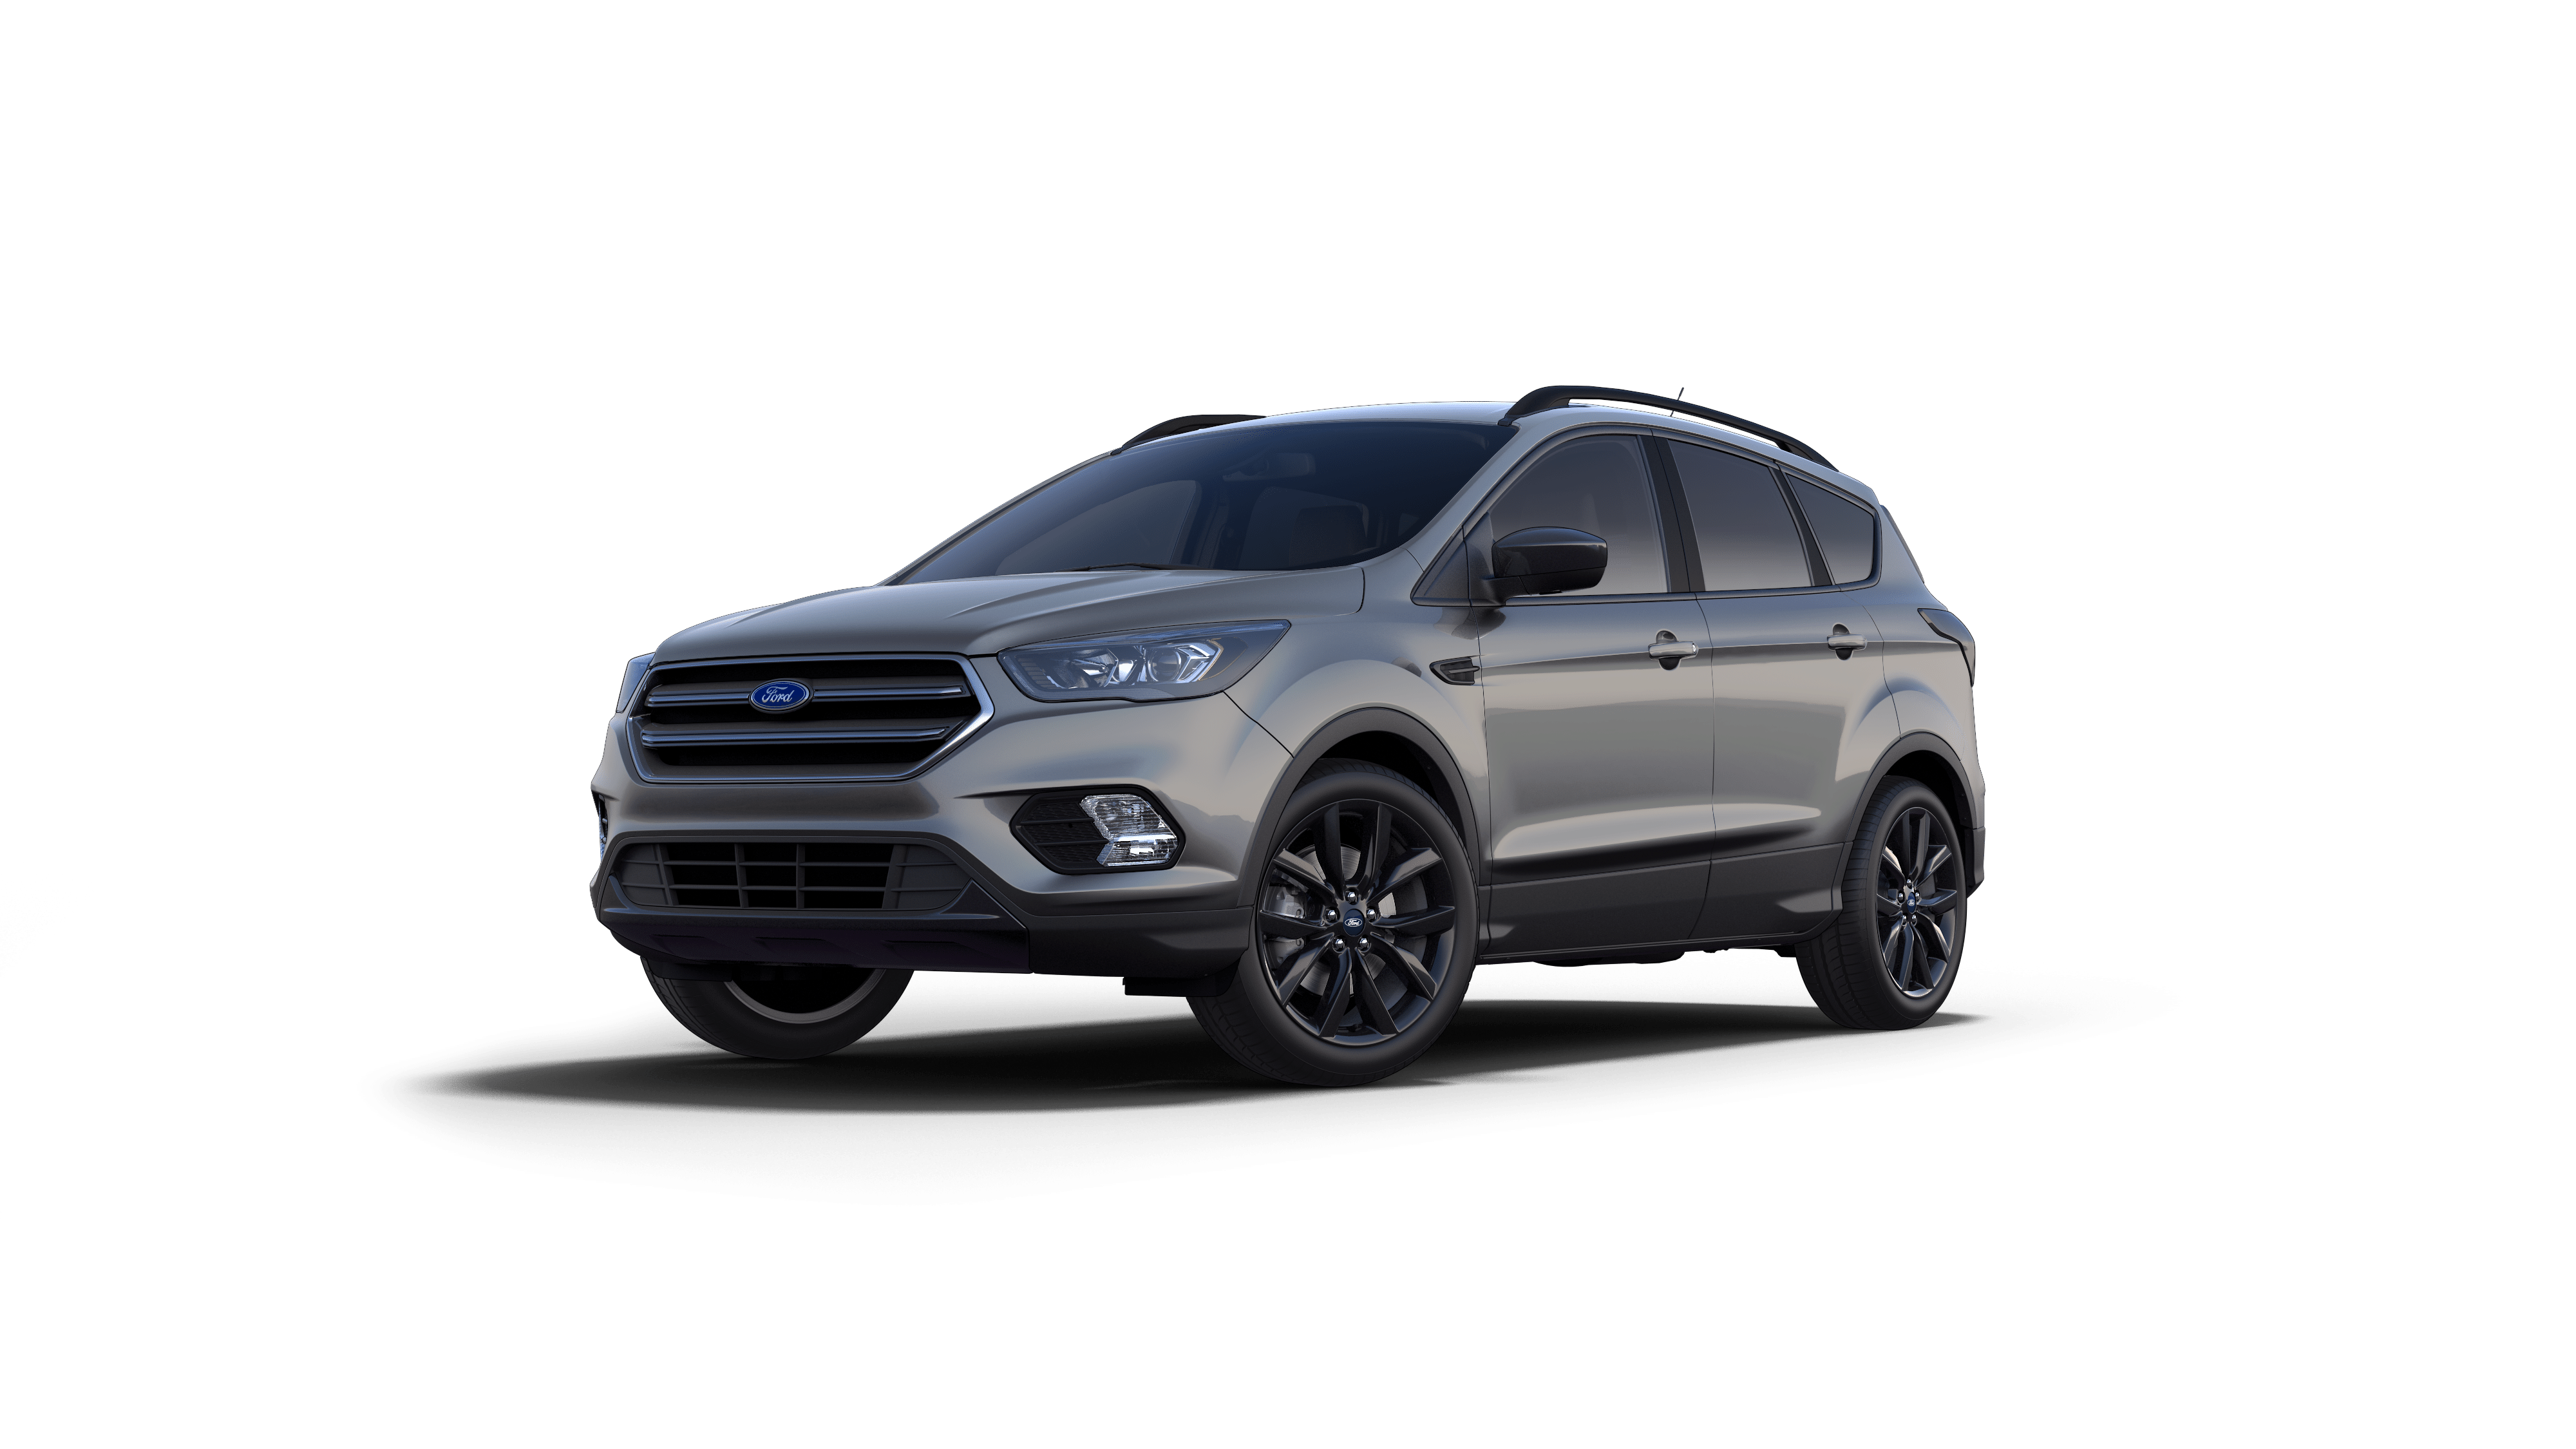 Ford Escape best photo